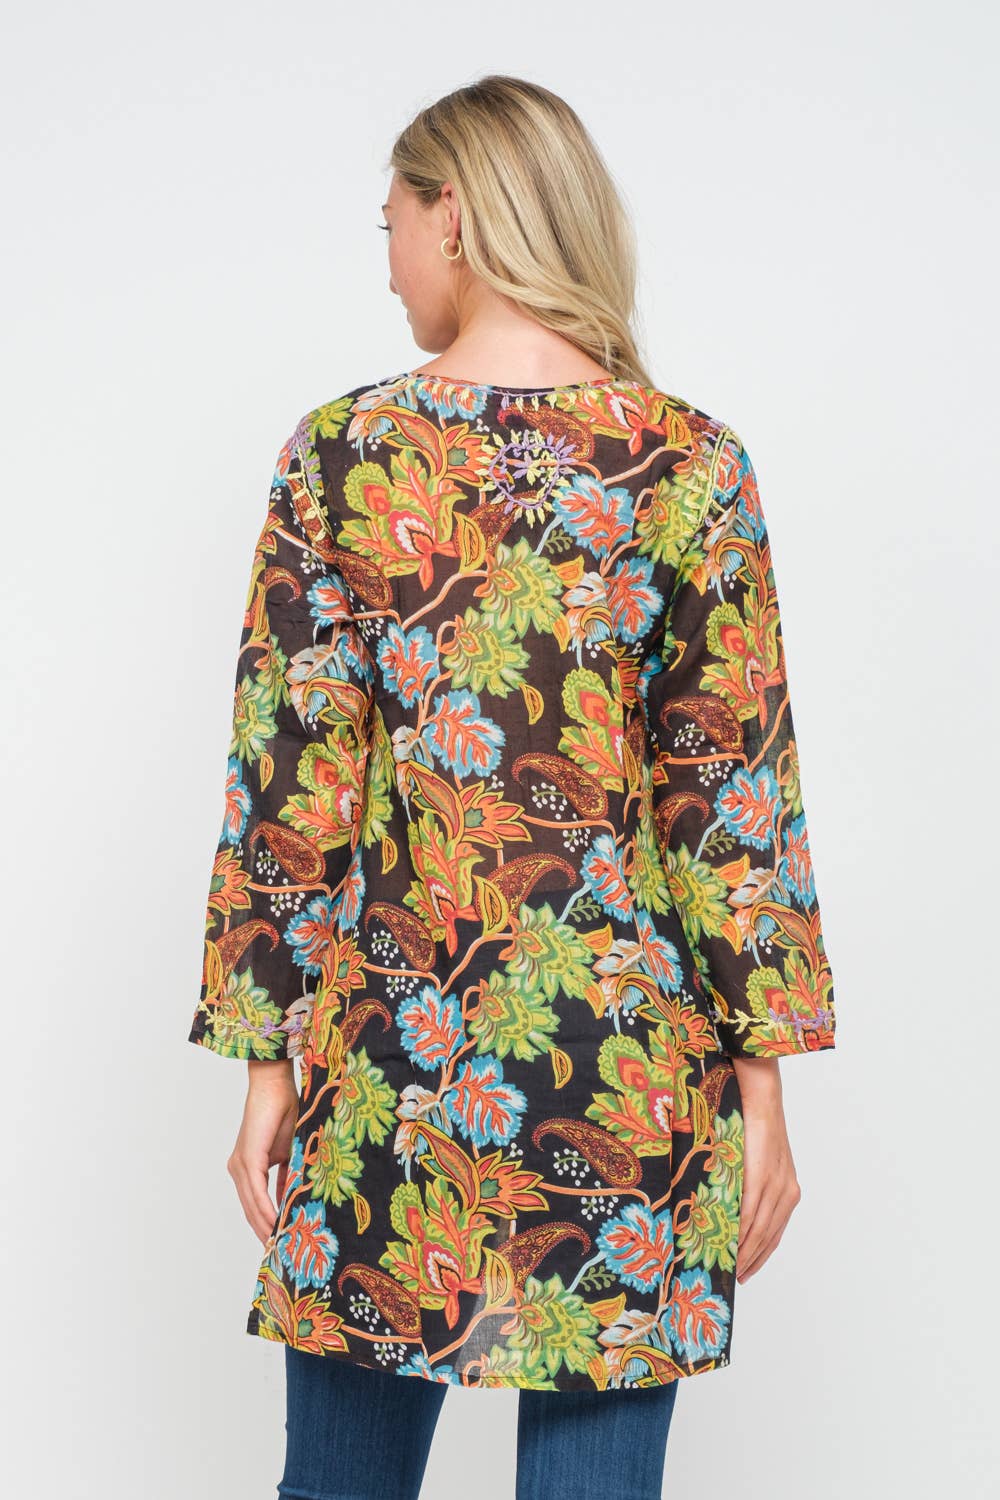 Tunic: Carlyle Black and Apple Green Printed Embroidered